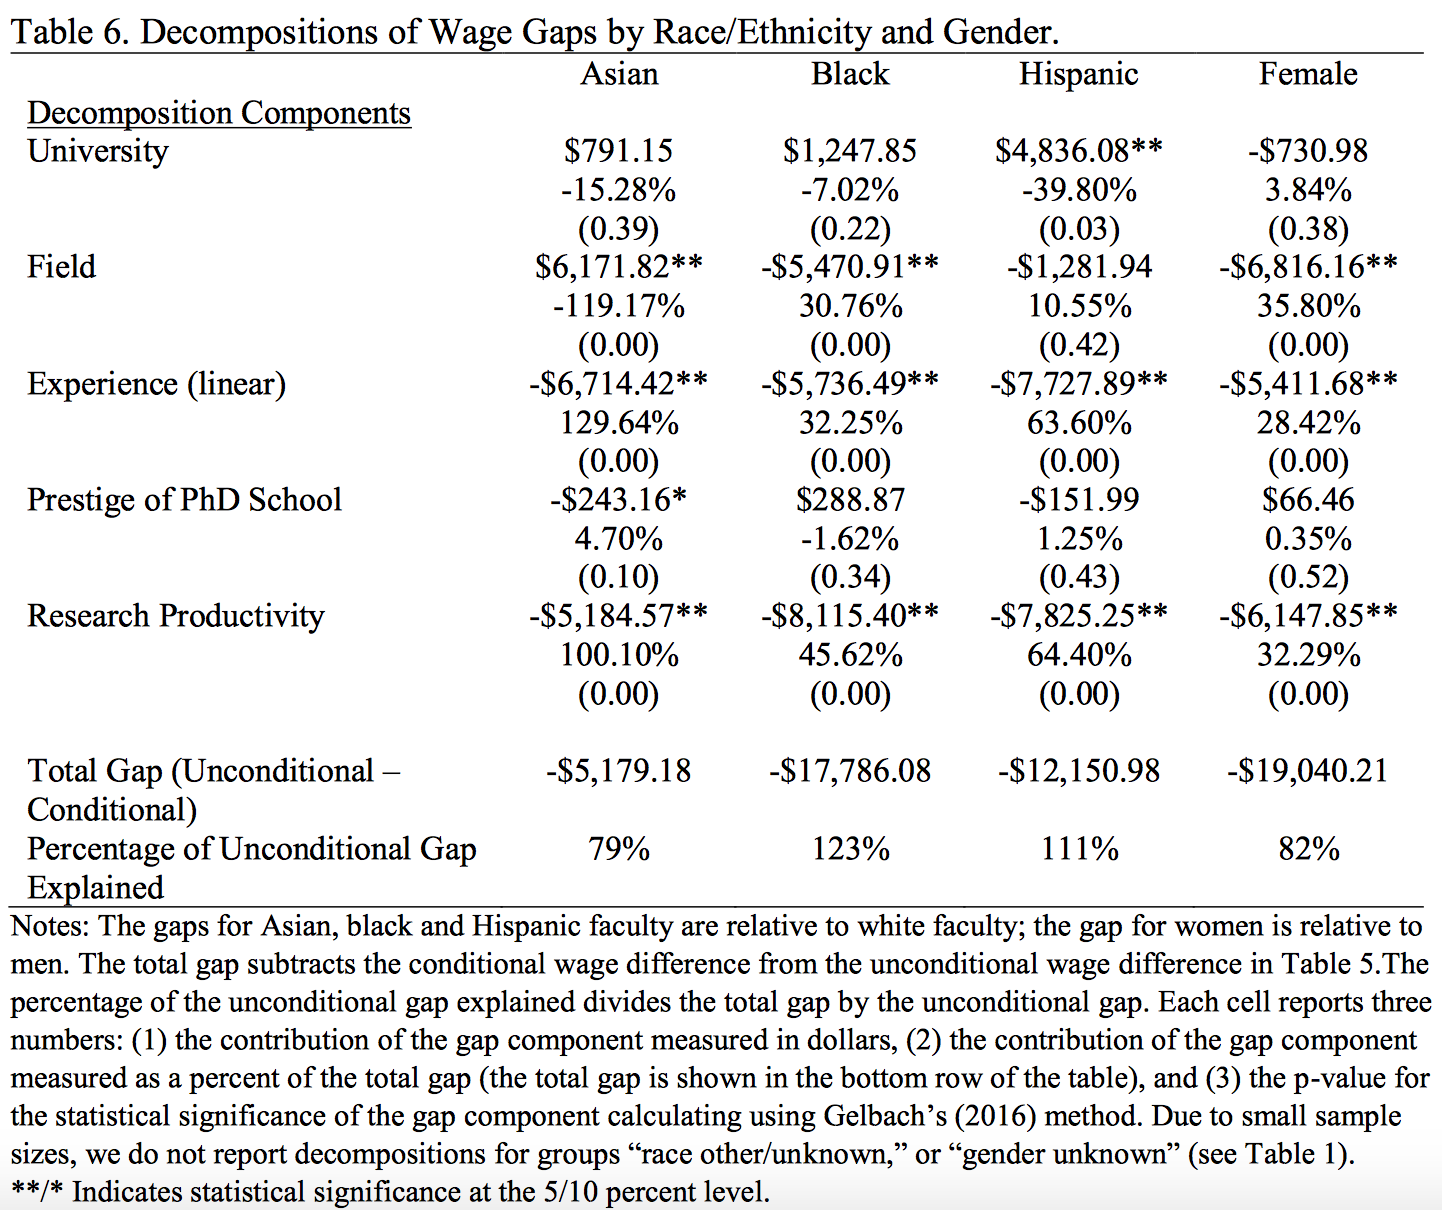 Table 6. Decompositions of Wage Gaps by Race/Ethnicity and Gender. Table breaks down by following decomposition components: university, field, experience (linear), prestige of Ph.D. school, and research productivity. Note: The gaps for Asian, black and Hispanic faculty are relative to white faculty; the gap for women is relative to men.